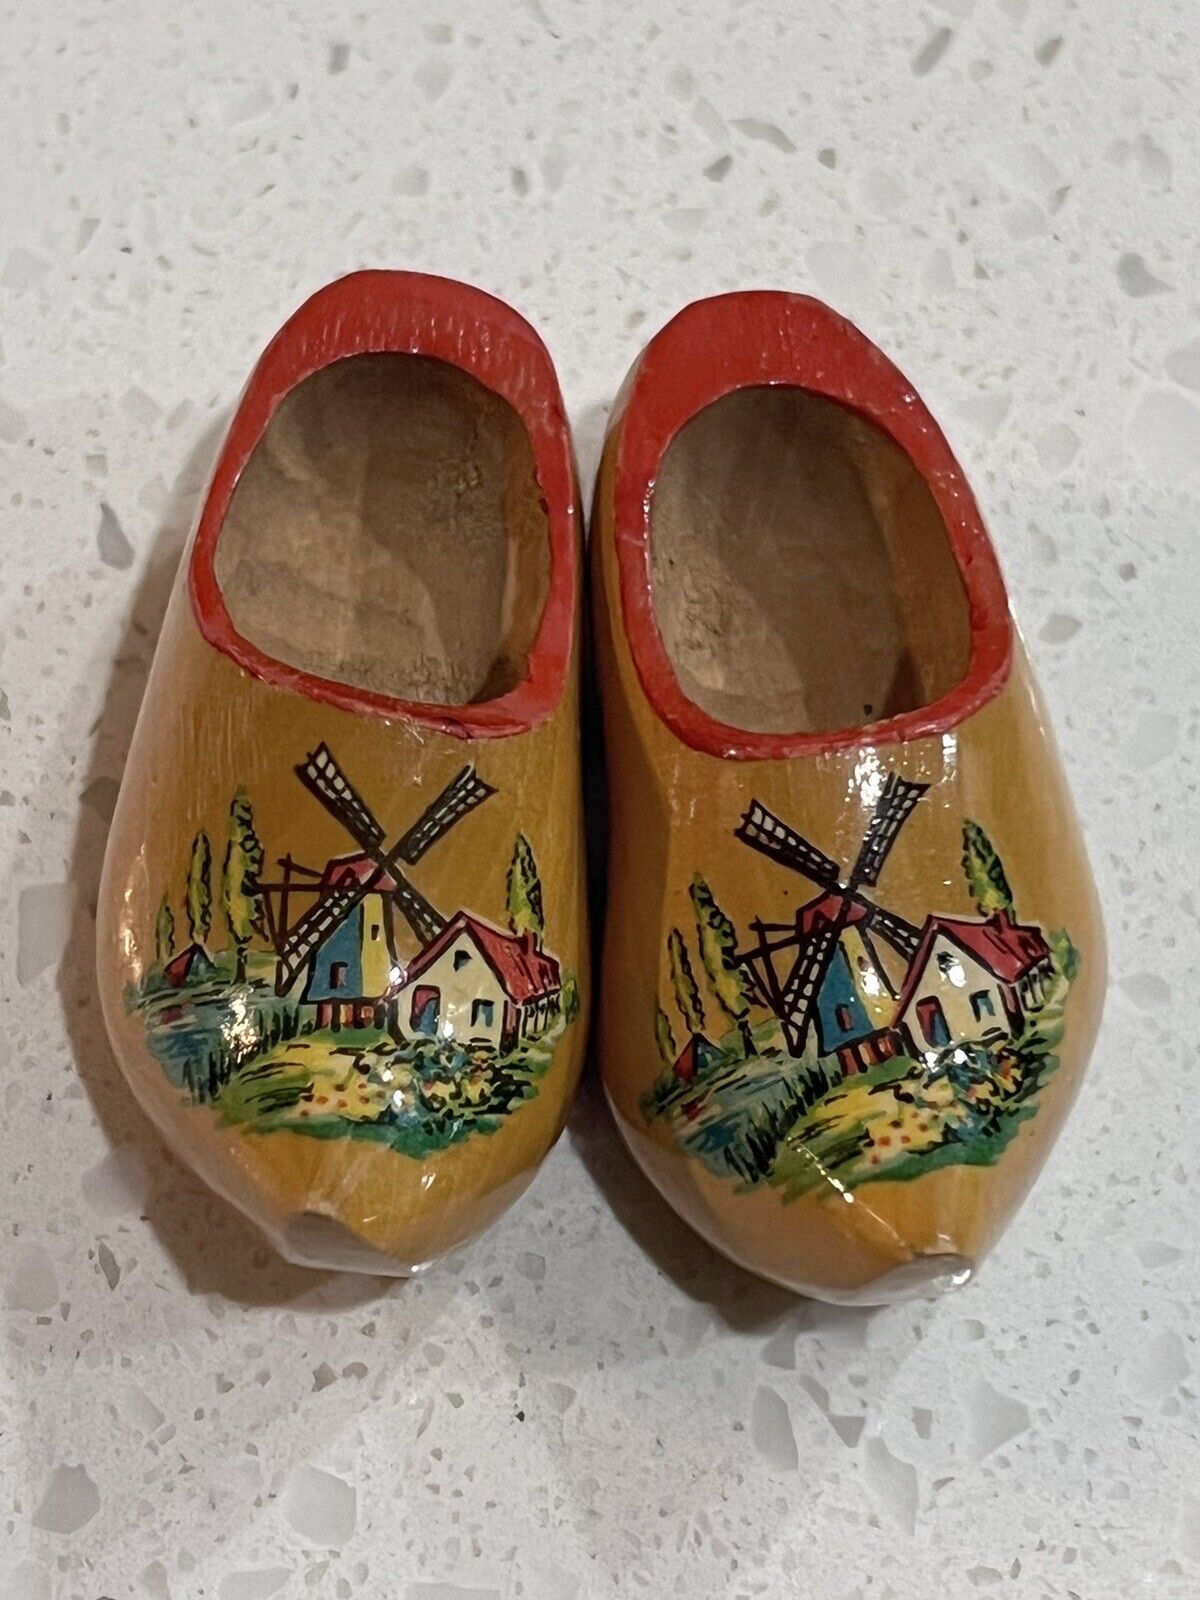 Dutch Handcarved/Handpainted Holland Wooden Clogs Shoes w/Windmill Authentic Vtg